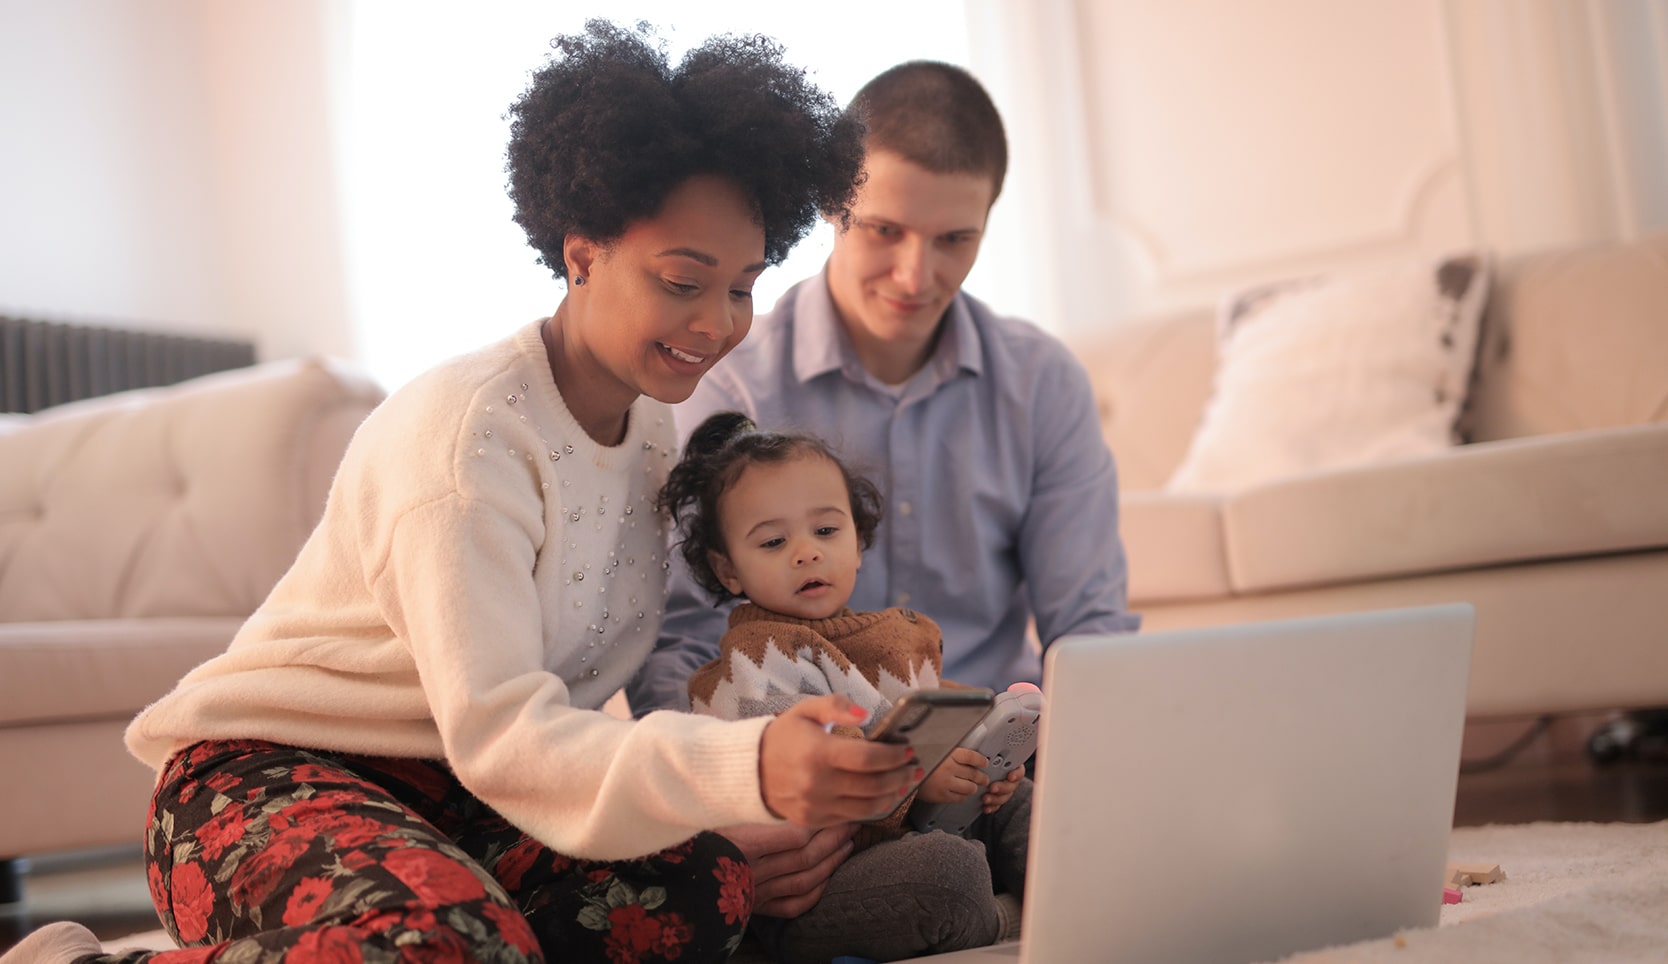 Image of woman, man and a baby sitting on the floor of a living room in front of a laptop and phone